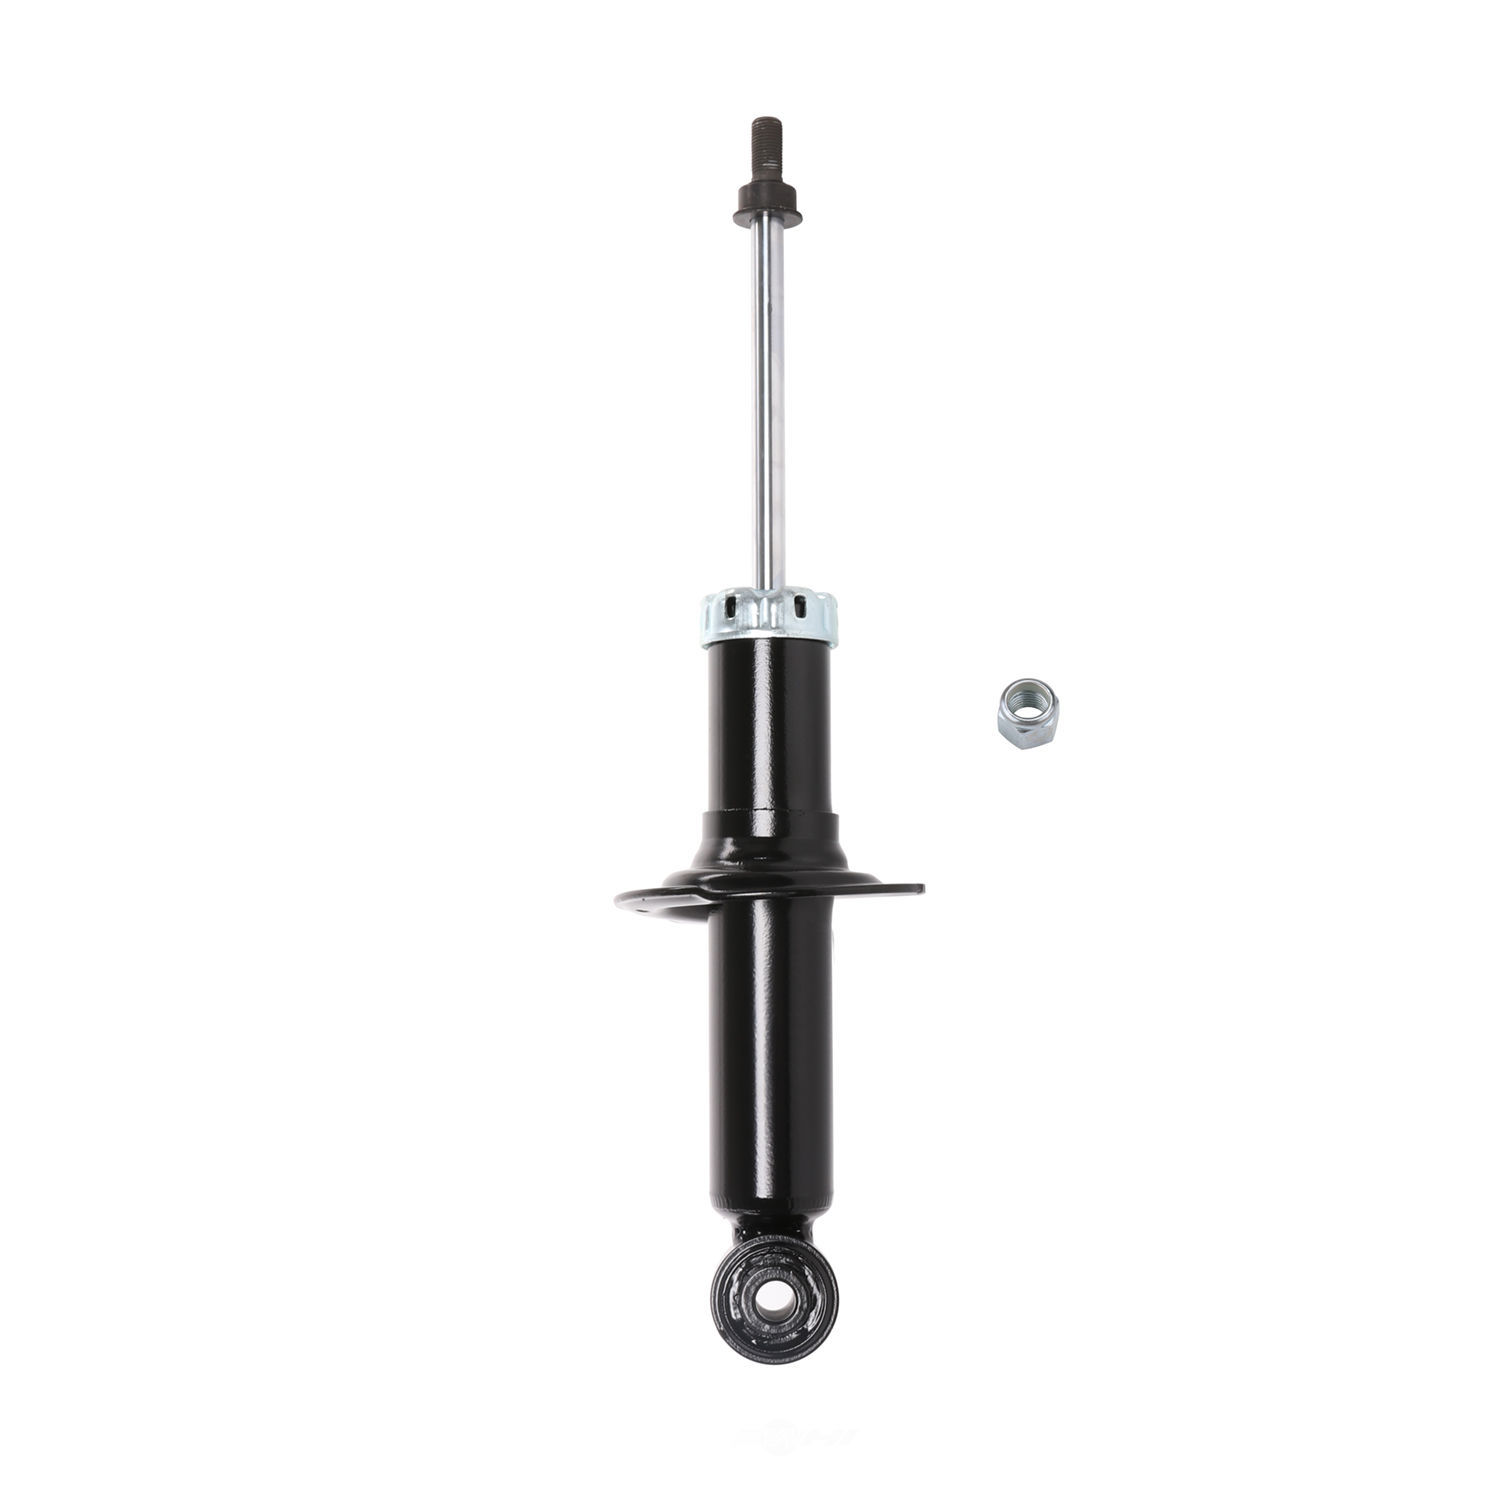 PERFORMANCE RIDE TECHNOLOGY BY ADD - Suspension Strut Assembly - P6T 373264